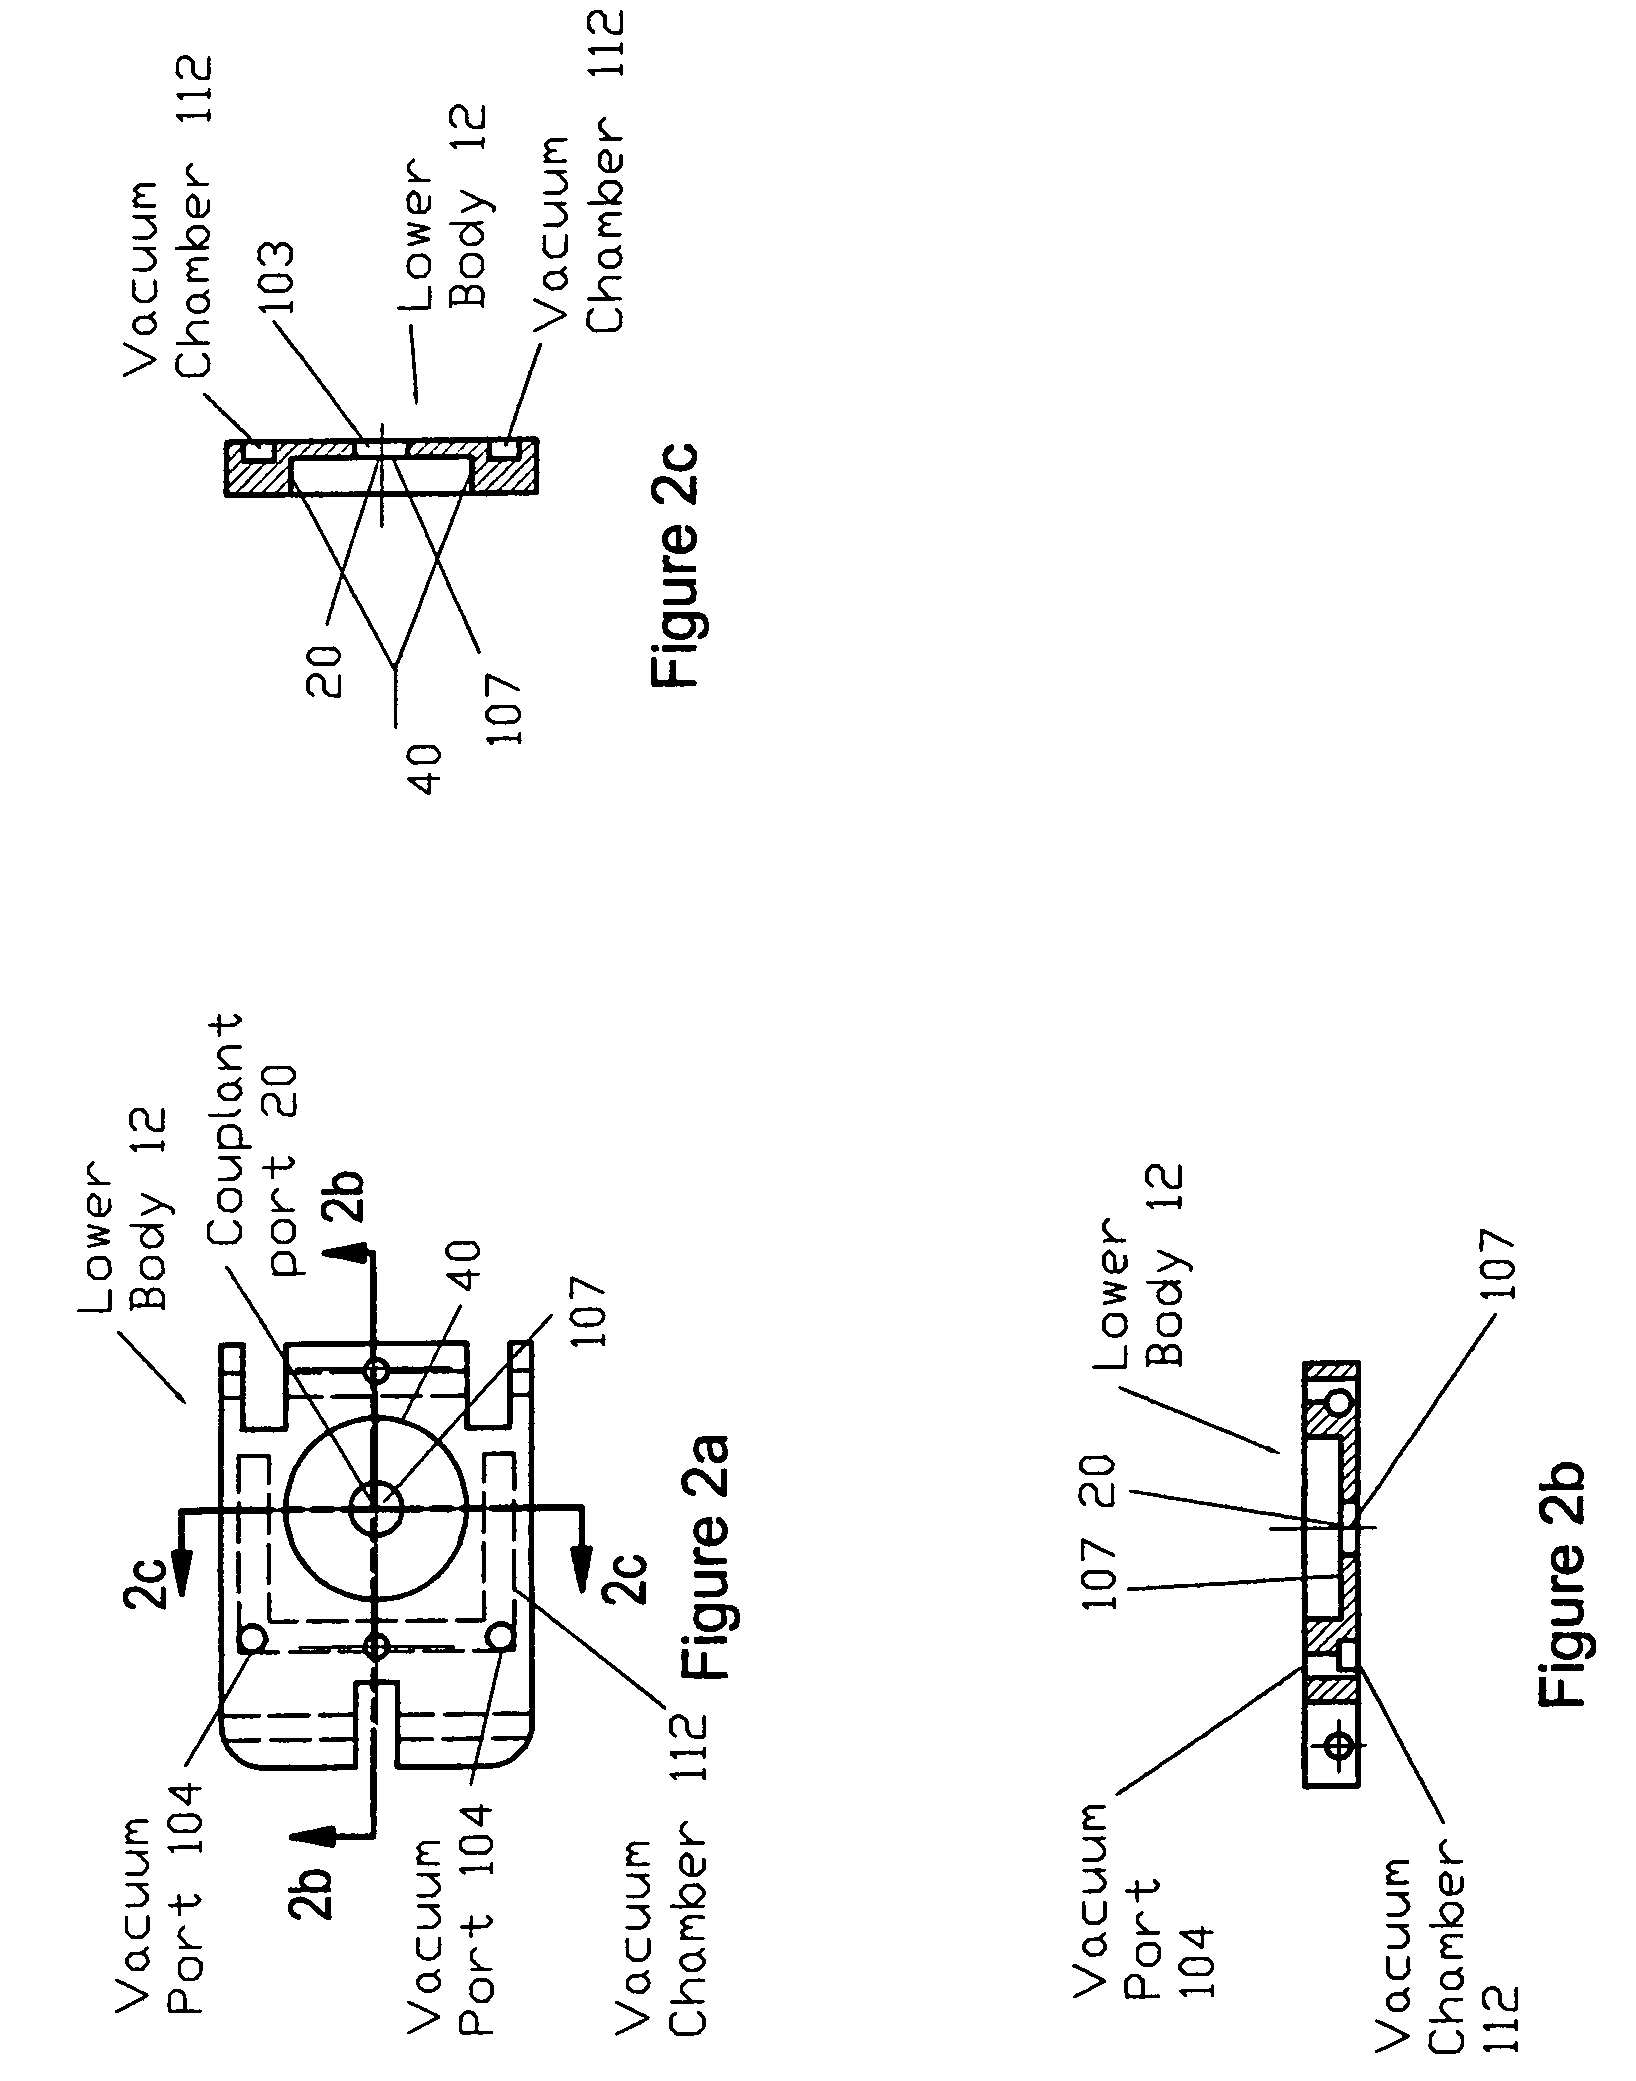 Rigid-contact dripless bubbler (RCDB) apparatus for acoustic inspection of a workpiece in arbitrary scanning orientations